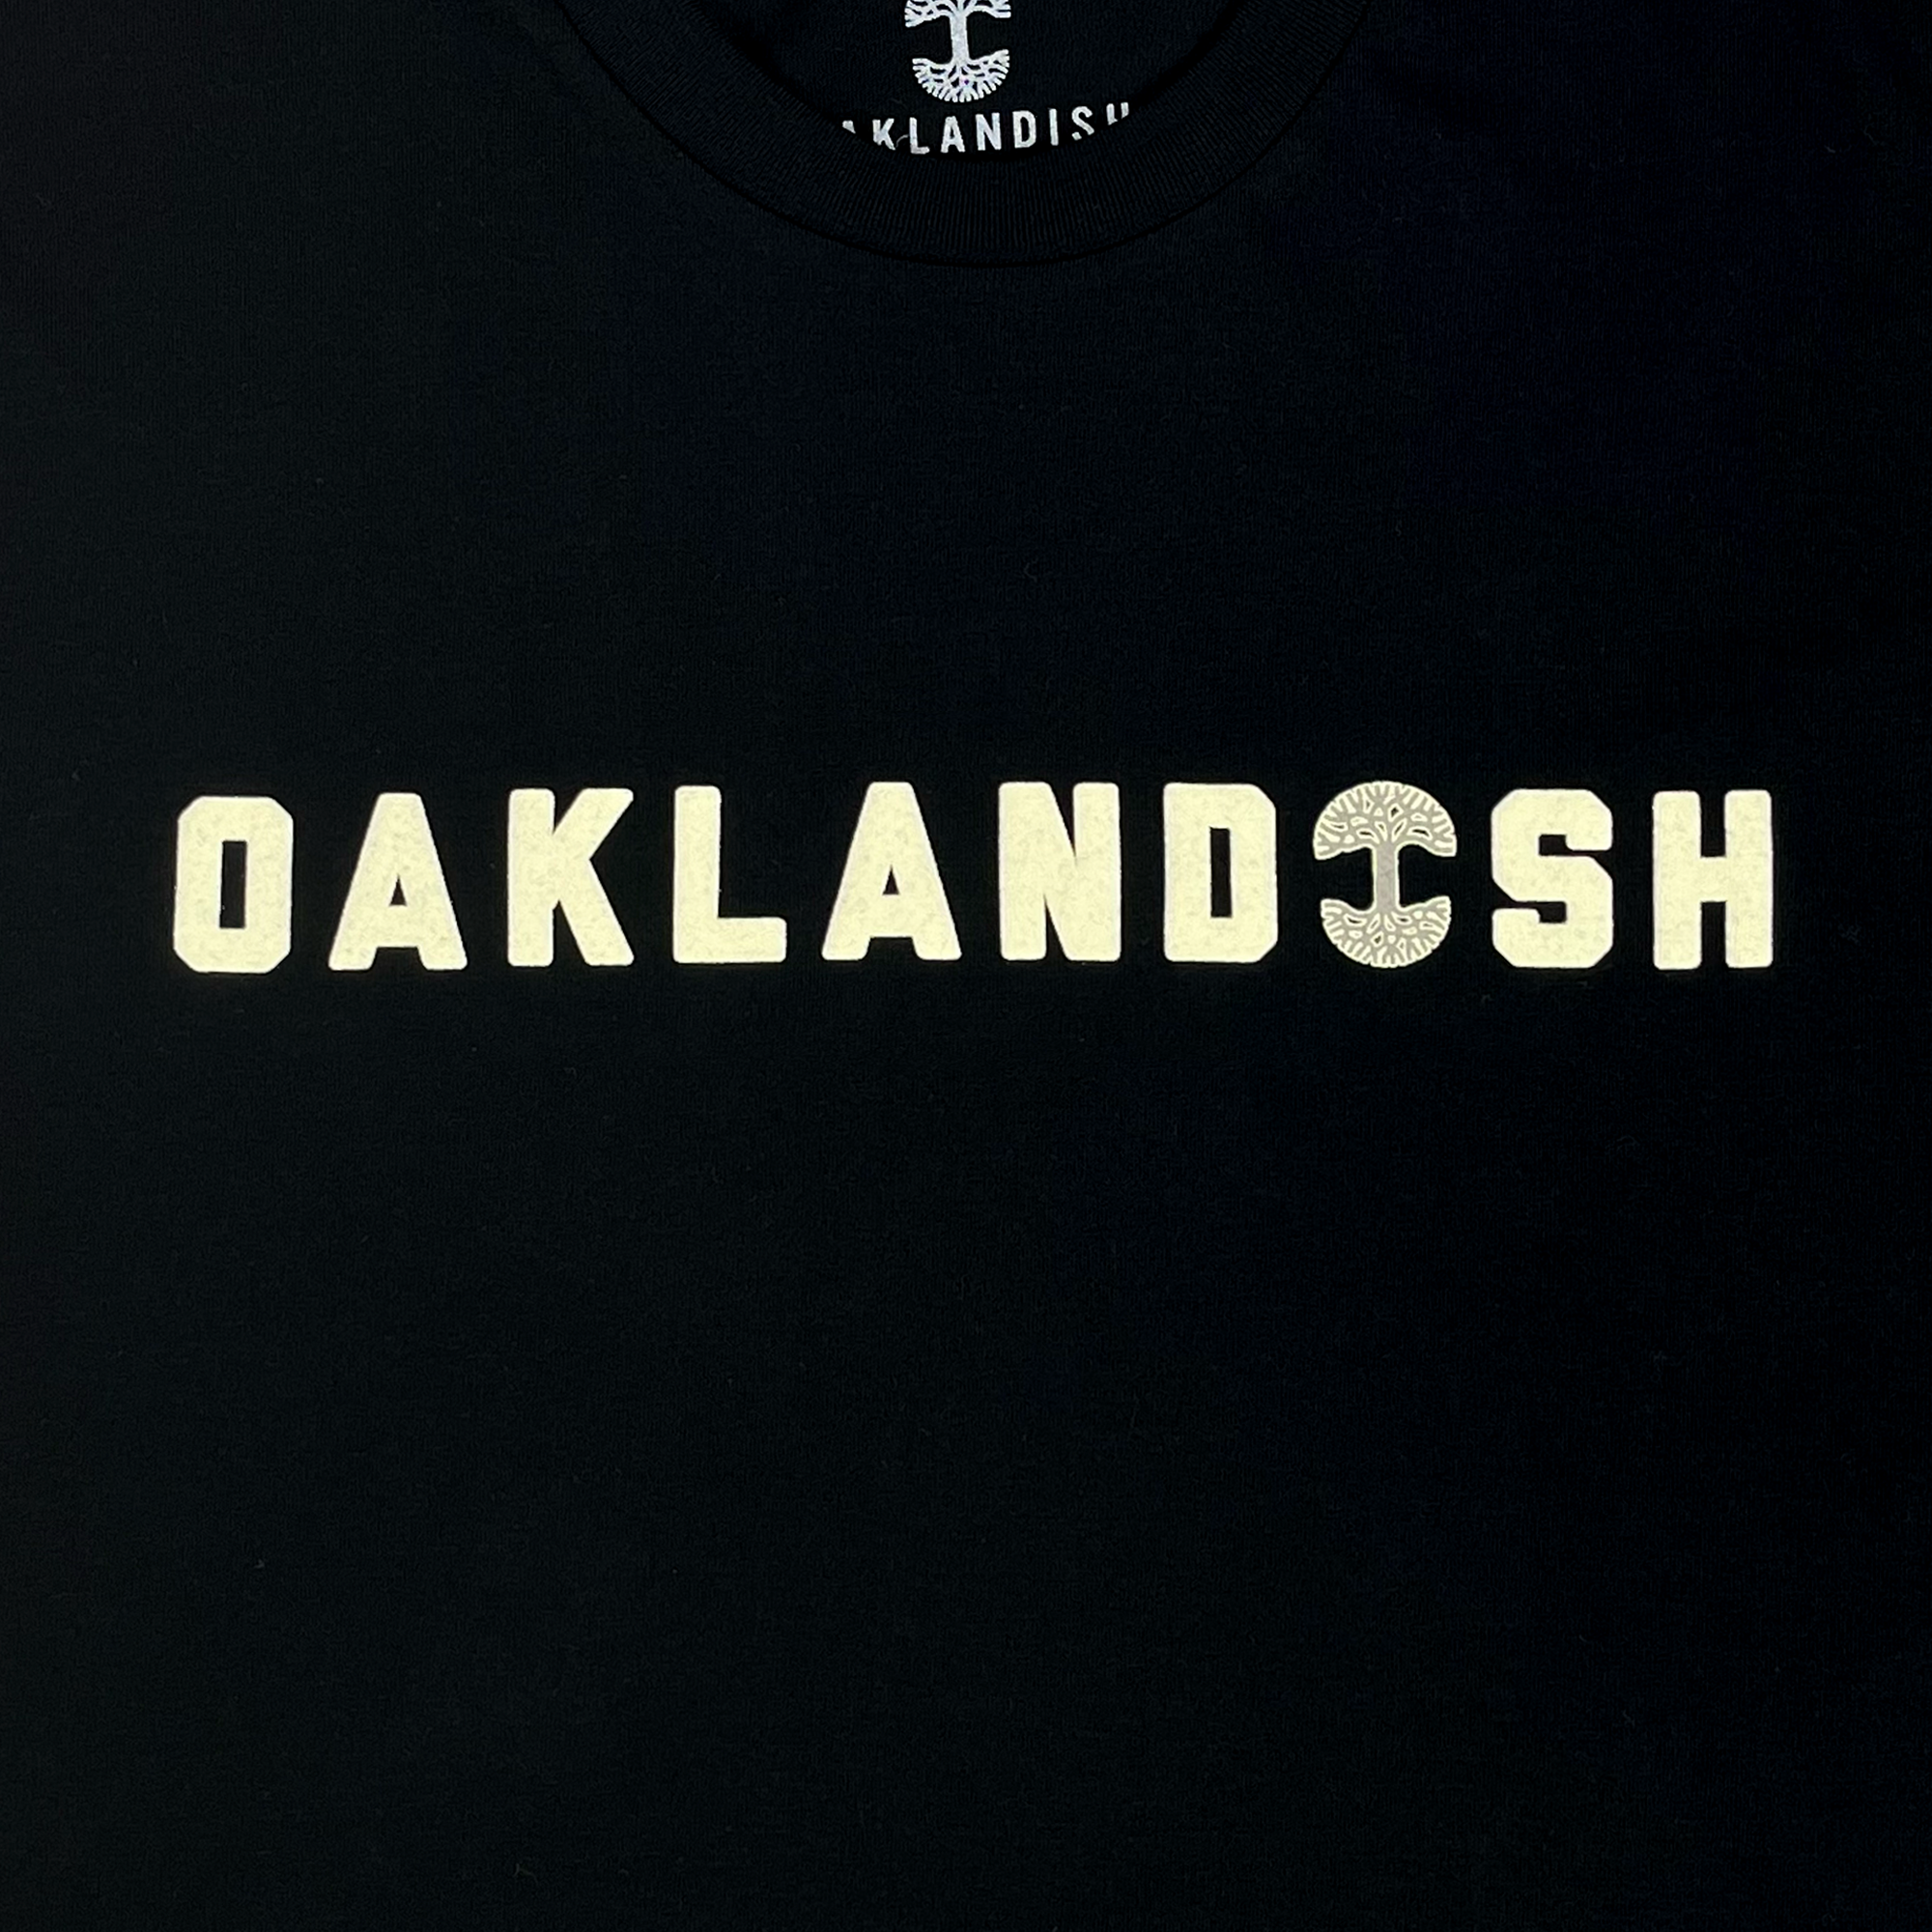 Detailed view of Cotton black t-shirt with Oaklandish Wordmark and Oaklandish tree logo in place of 'i'.